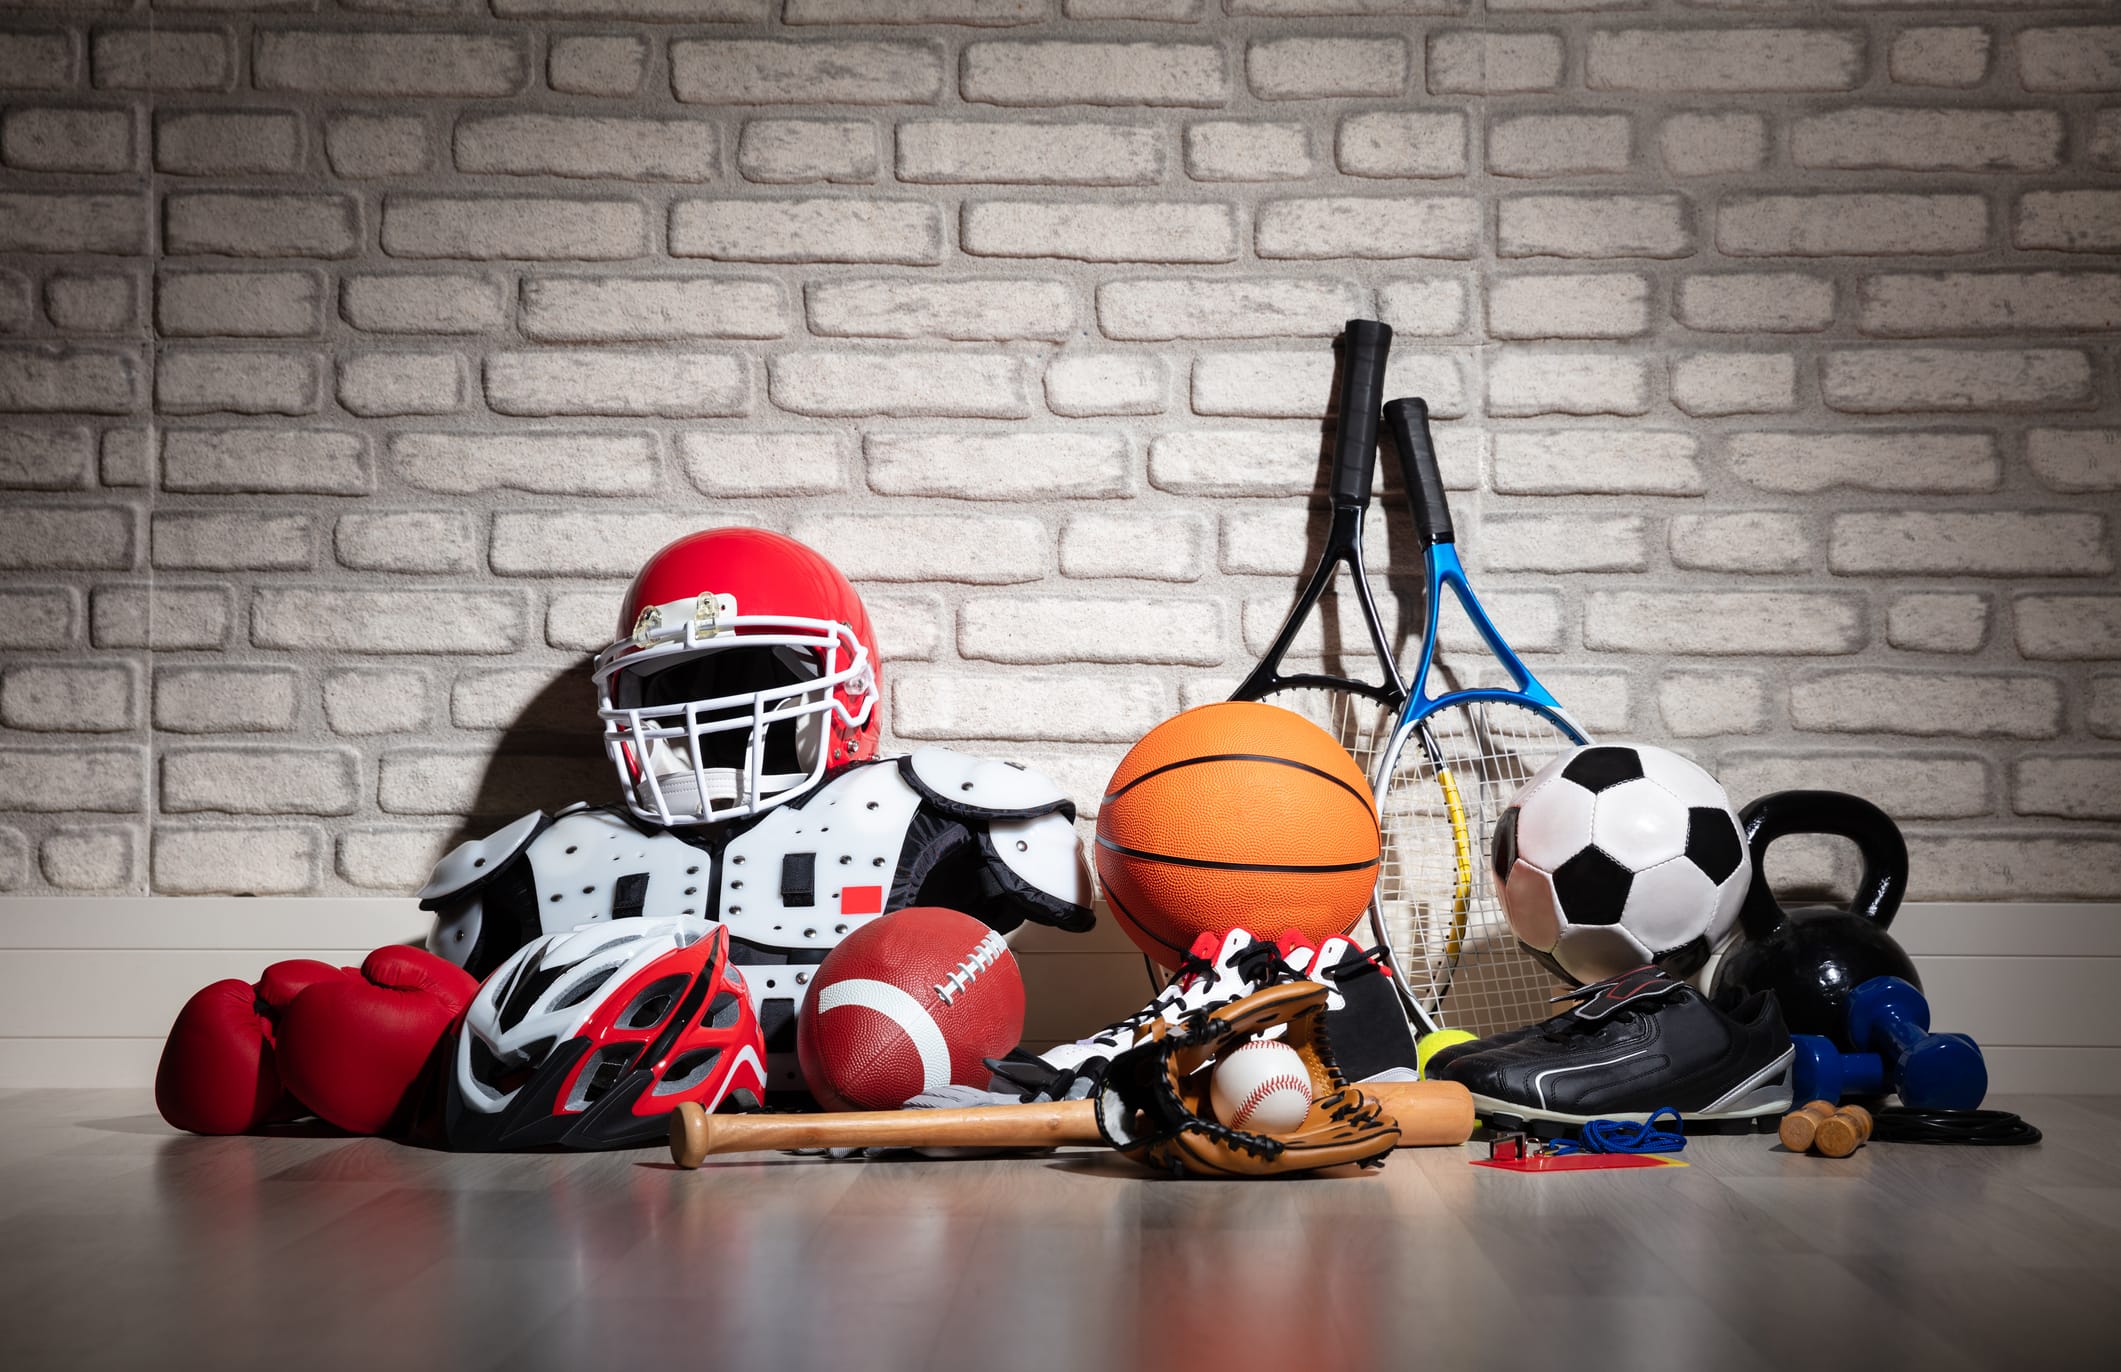 Sports equipment is laid up against wall. From left to right: boxing globes, bike helmet, football pads and helment, football, baseball bat, baseball glove and baseball, basketball, rackets, soccerball, and dumbell weights